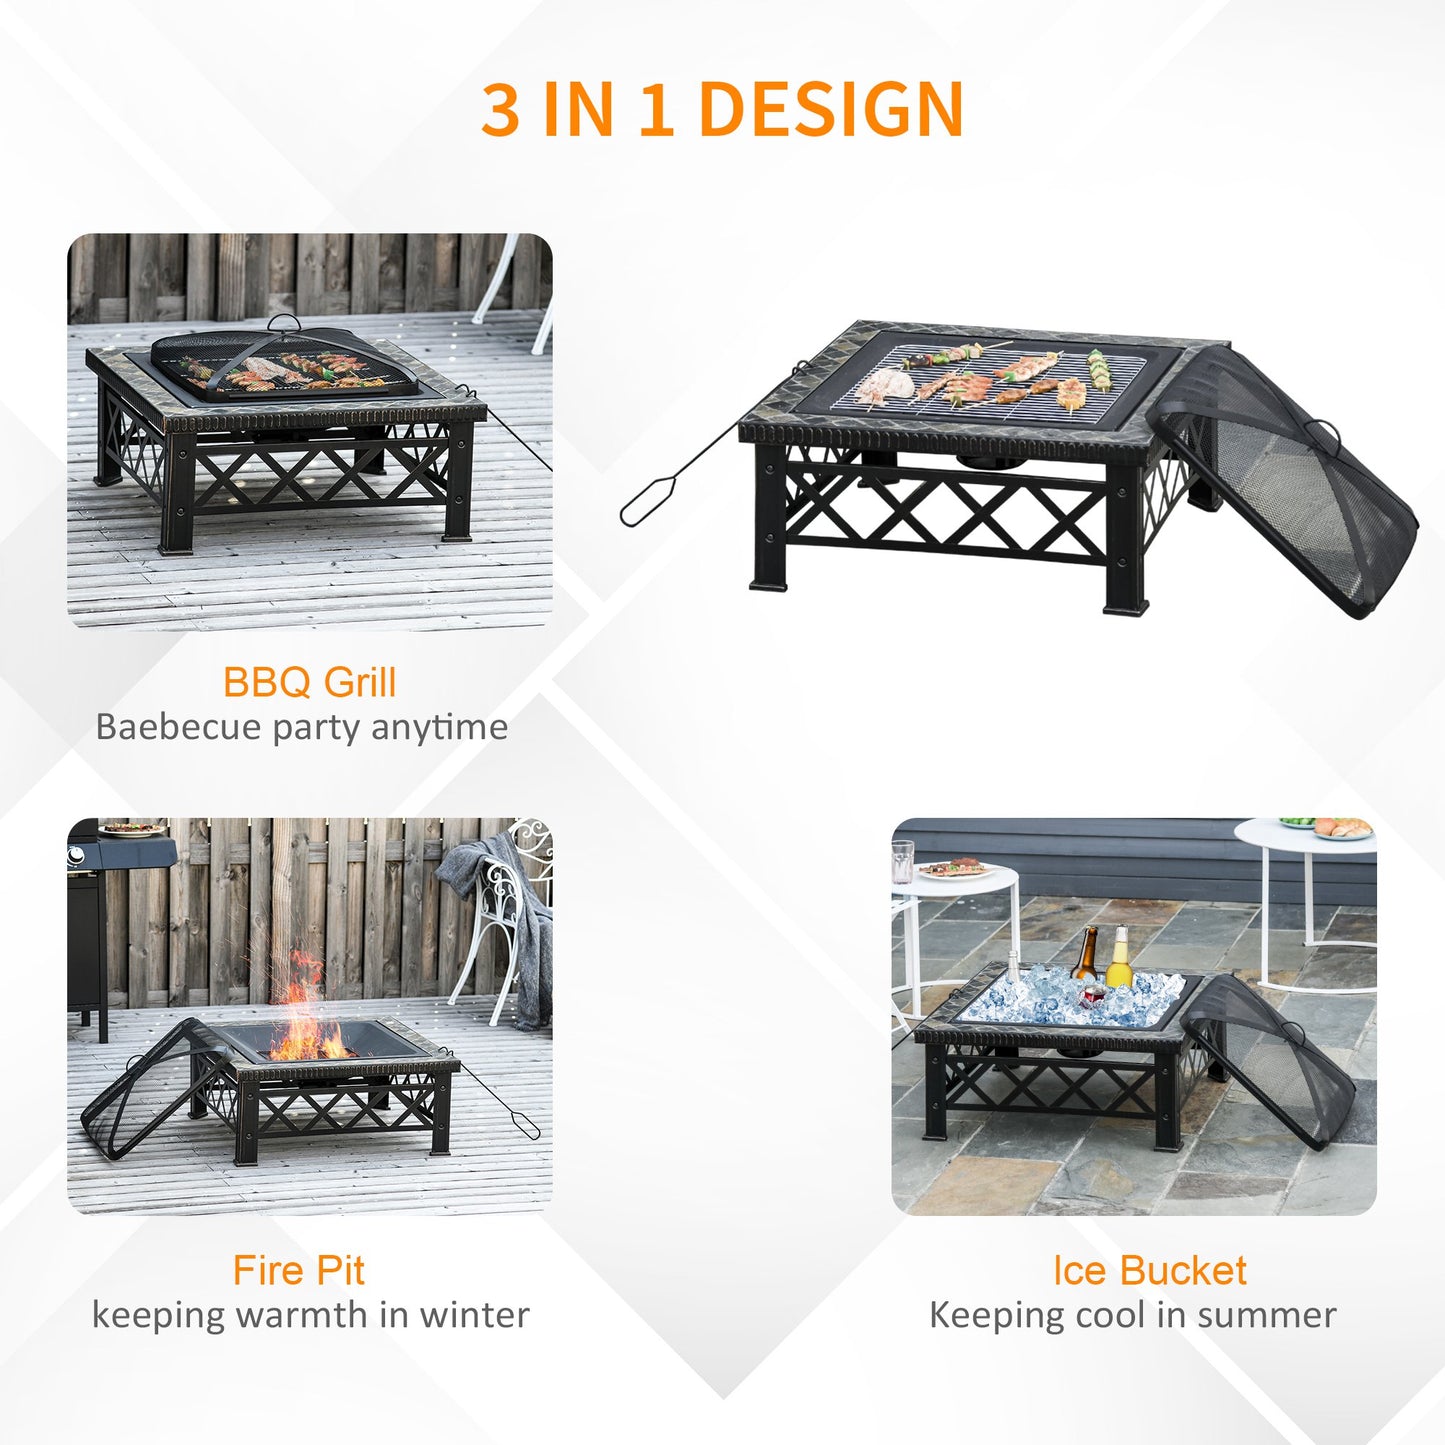 Outsunny 30" Outdoor Steel Square Firepit Square Stove with Spark Screen Cover, Log Grate, Poker, Grill Net for Patio